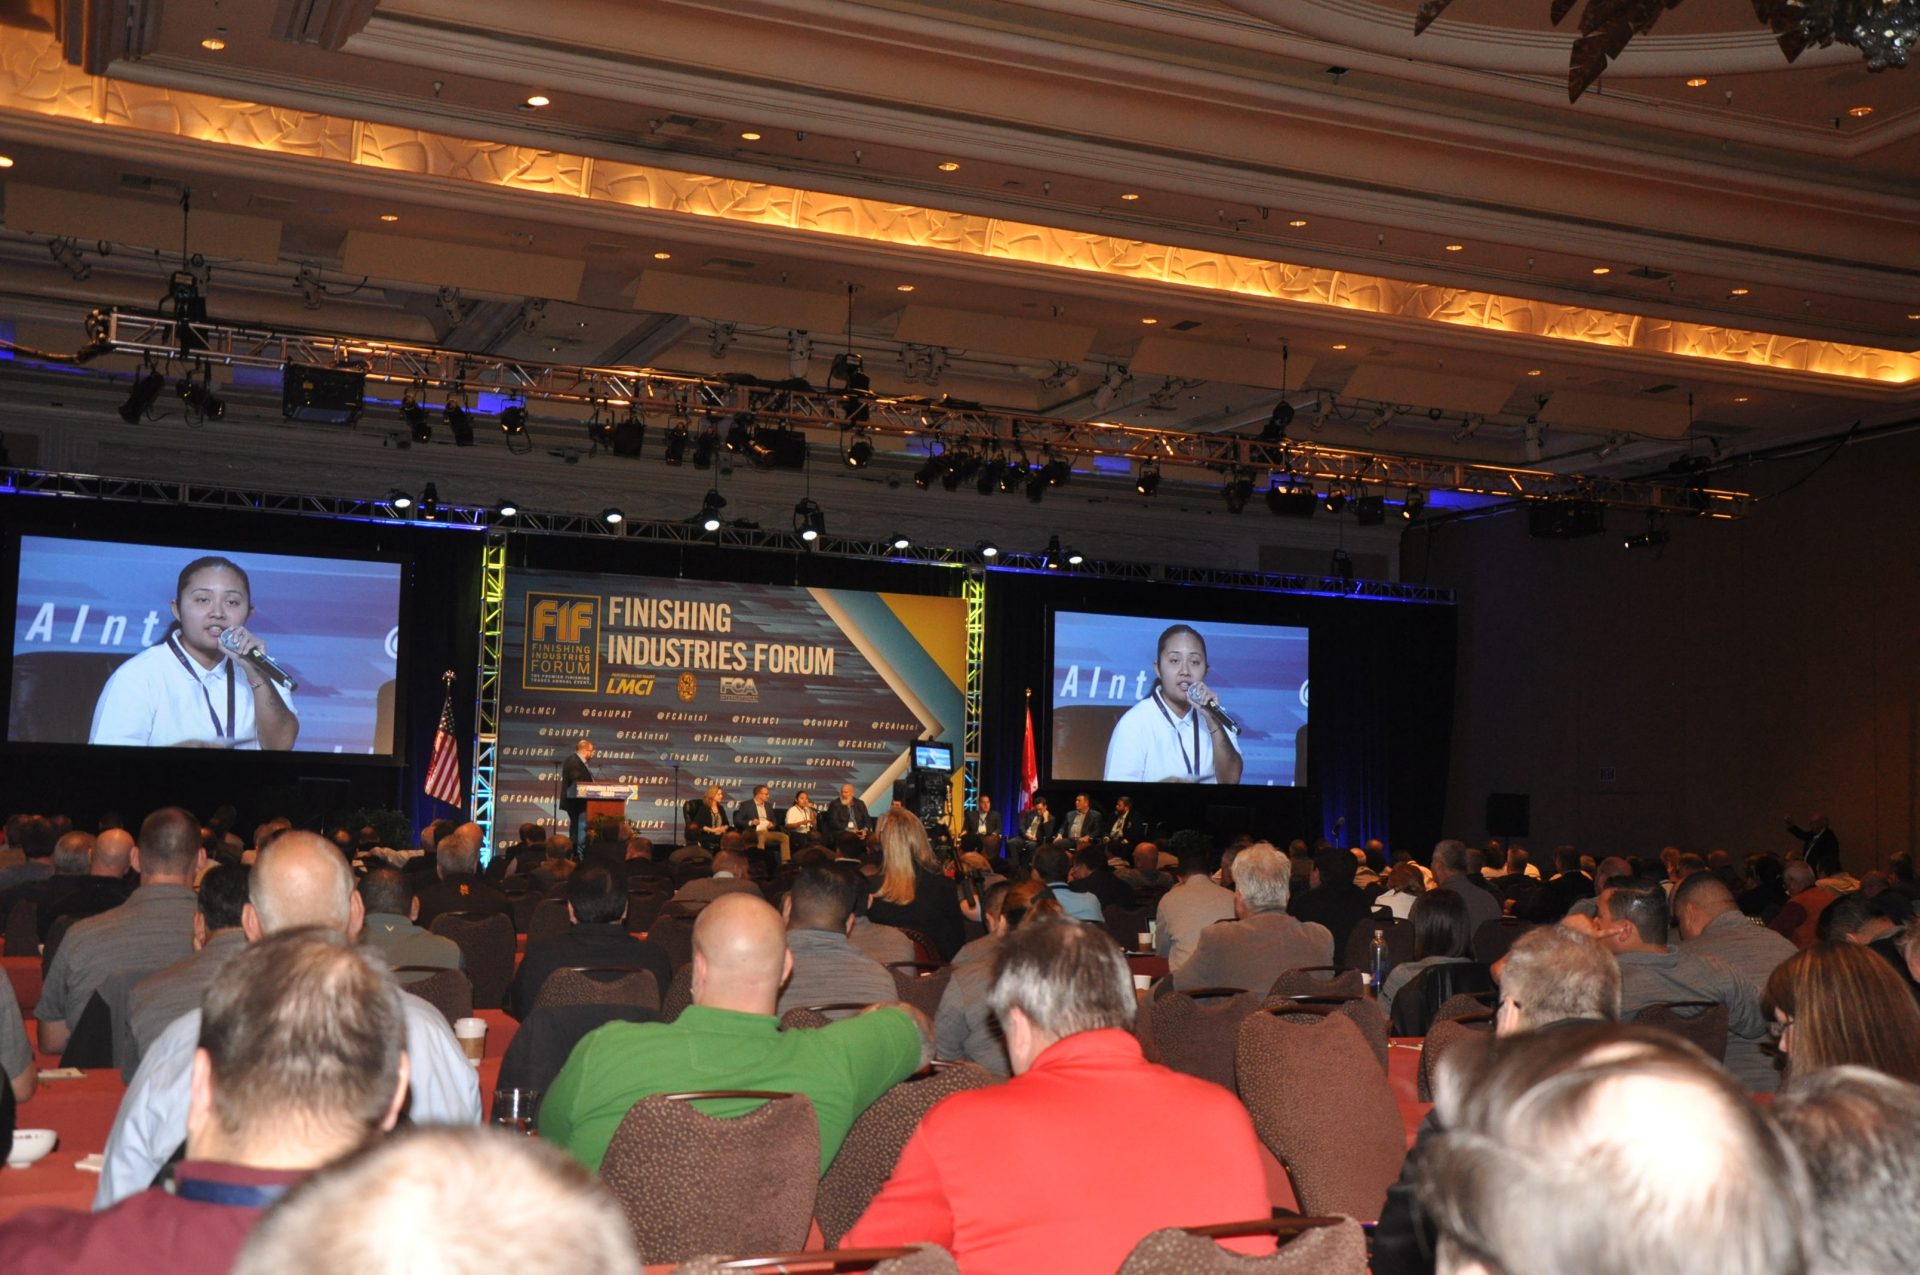 Image from the Gallery: Finishing Industries Forum – Las Vegas, NV